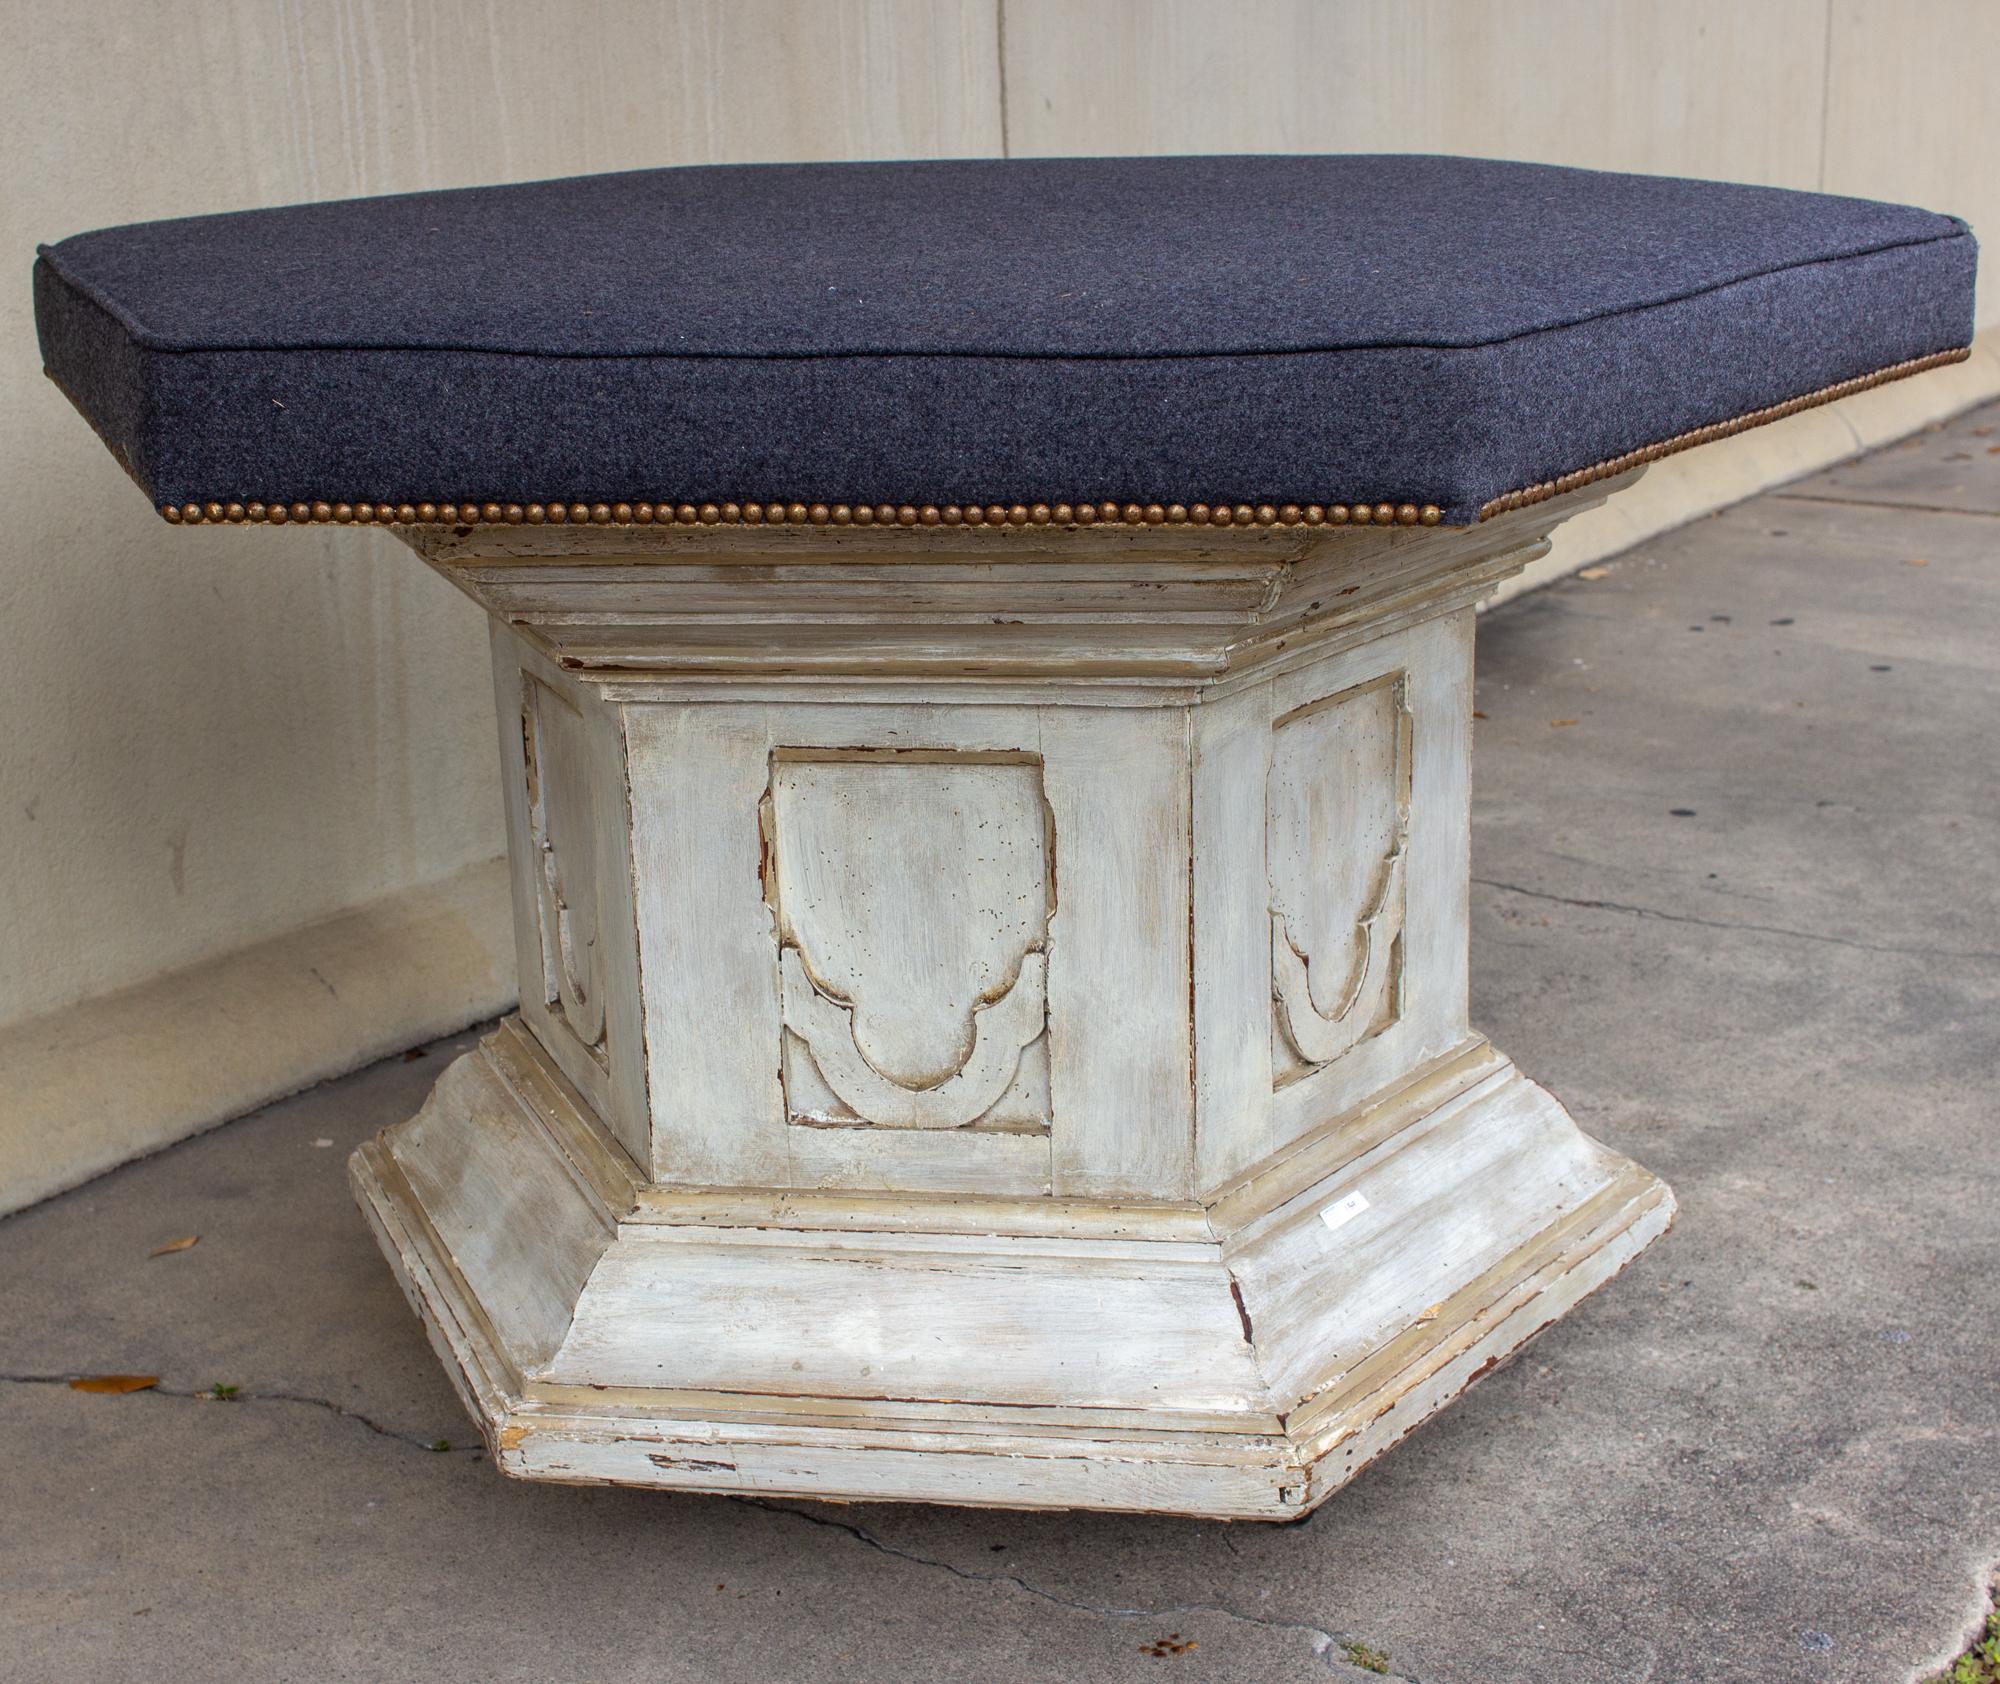 Antique French Ecclesial Hexagonal-Shaped Ottoman with Gray Wool Upholstery For Sale 1